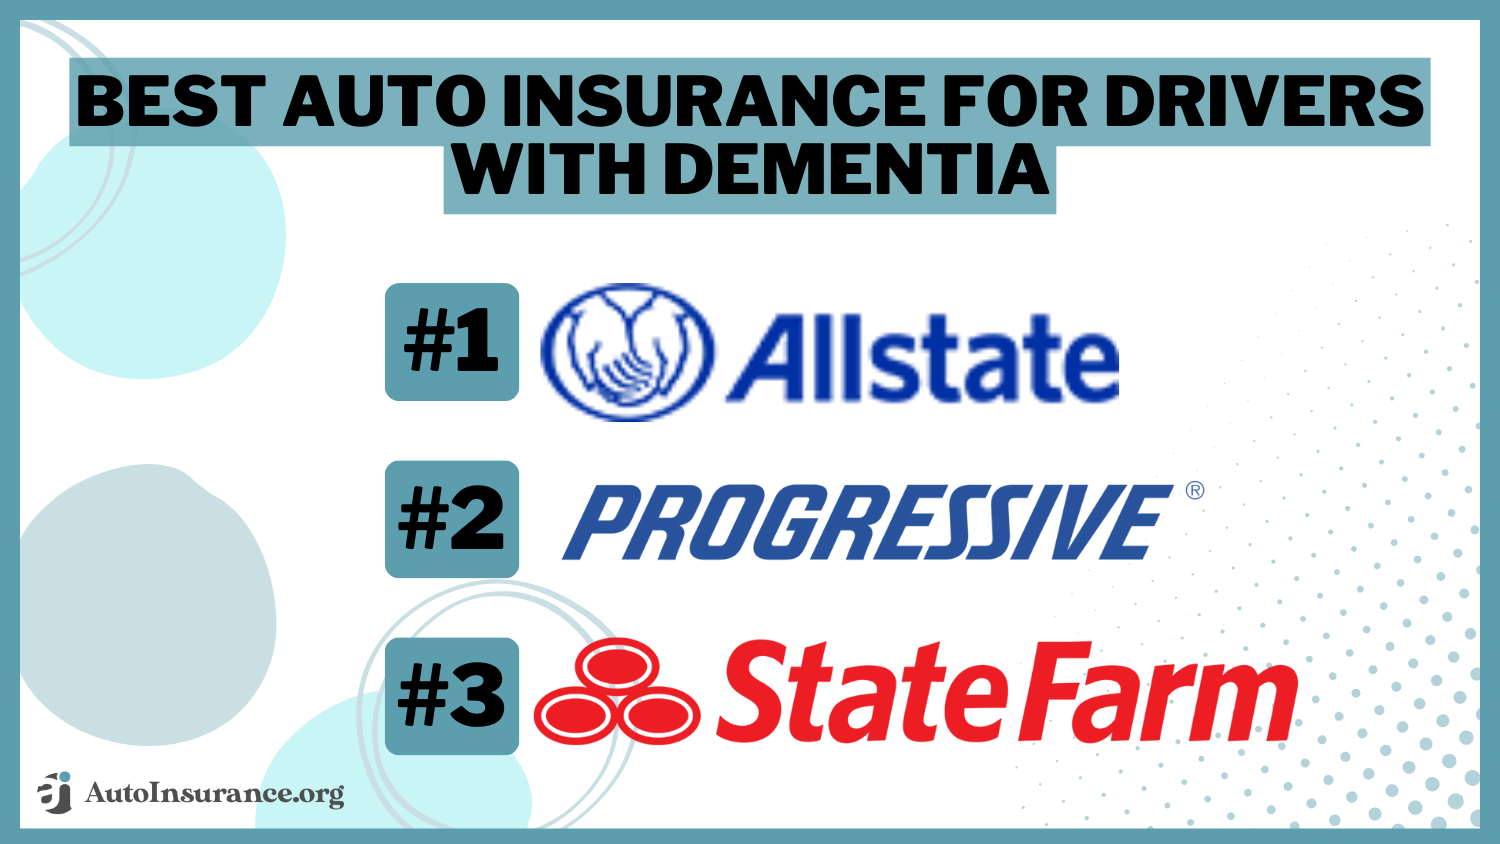 Best Auto Insurance for Drivers with Dementia: Allstate, Progressive, and State Farm